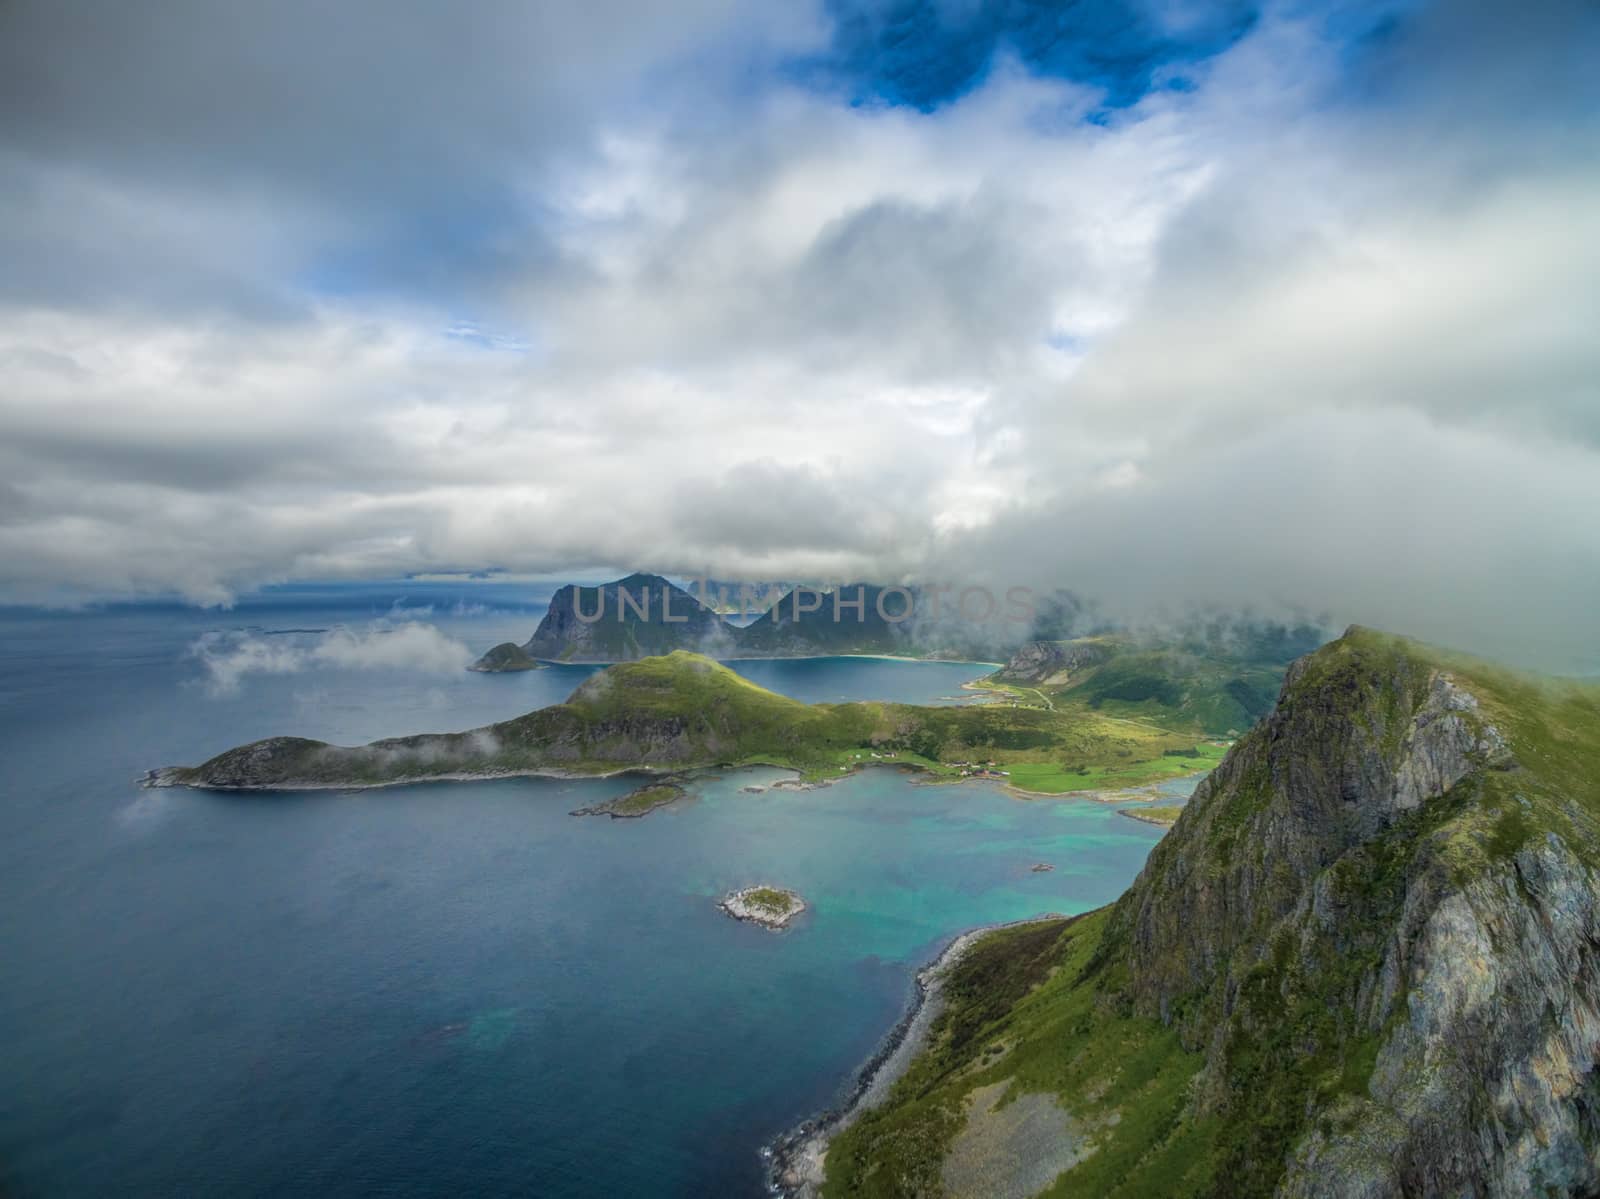 Low clouds above magnificent cliffs on Lofoten islands in Norway